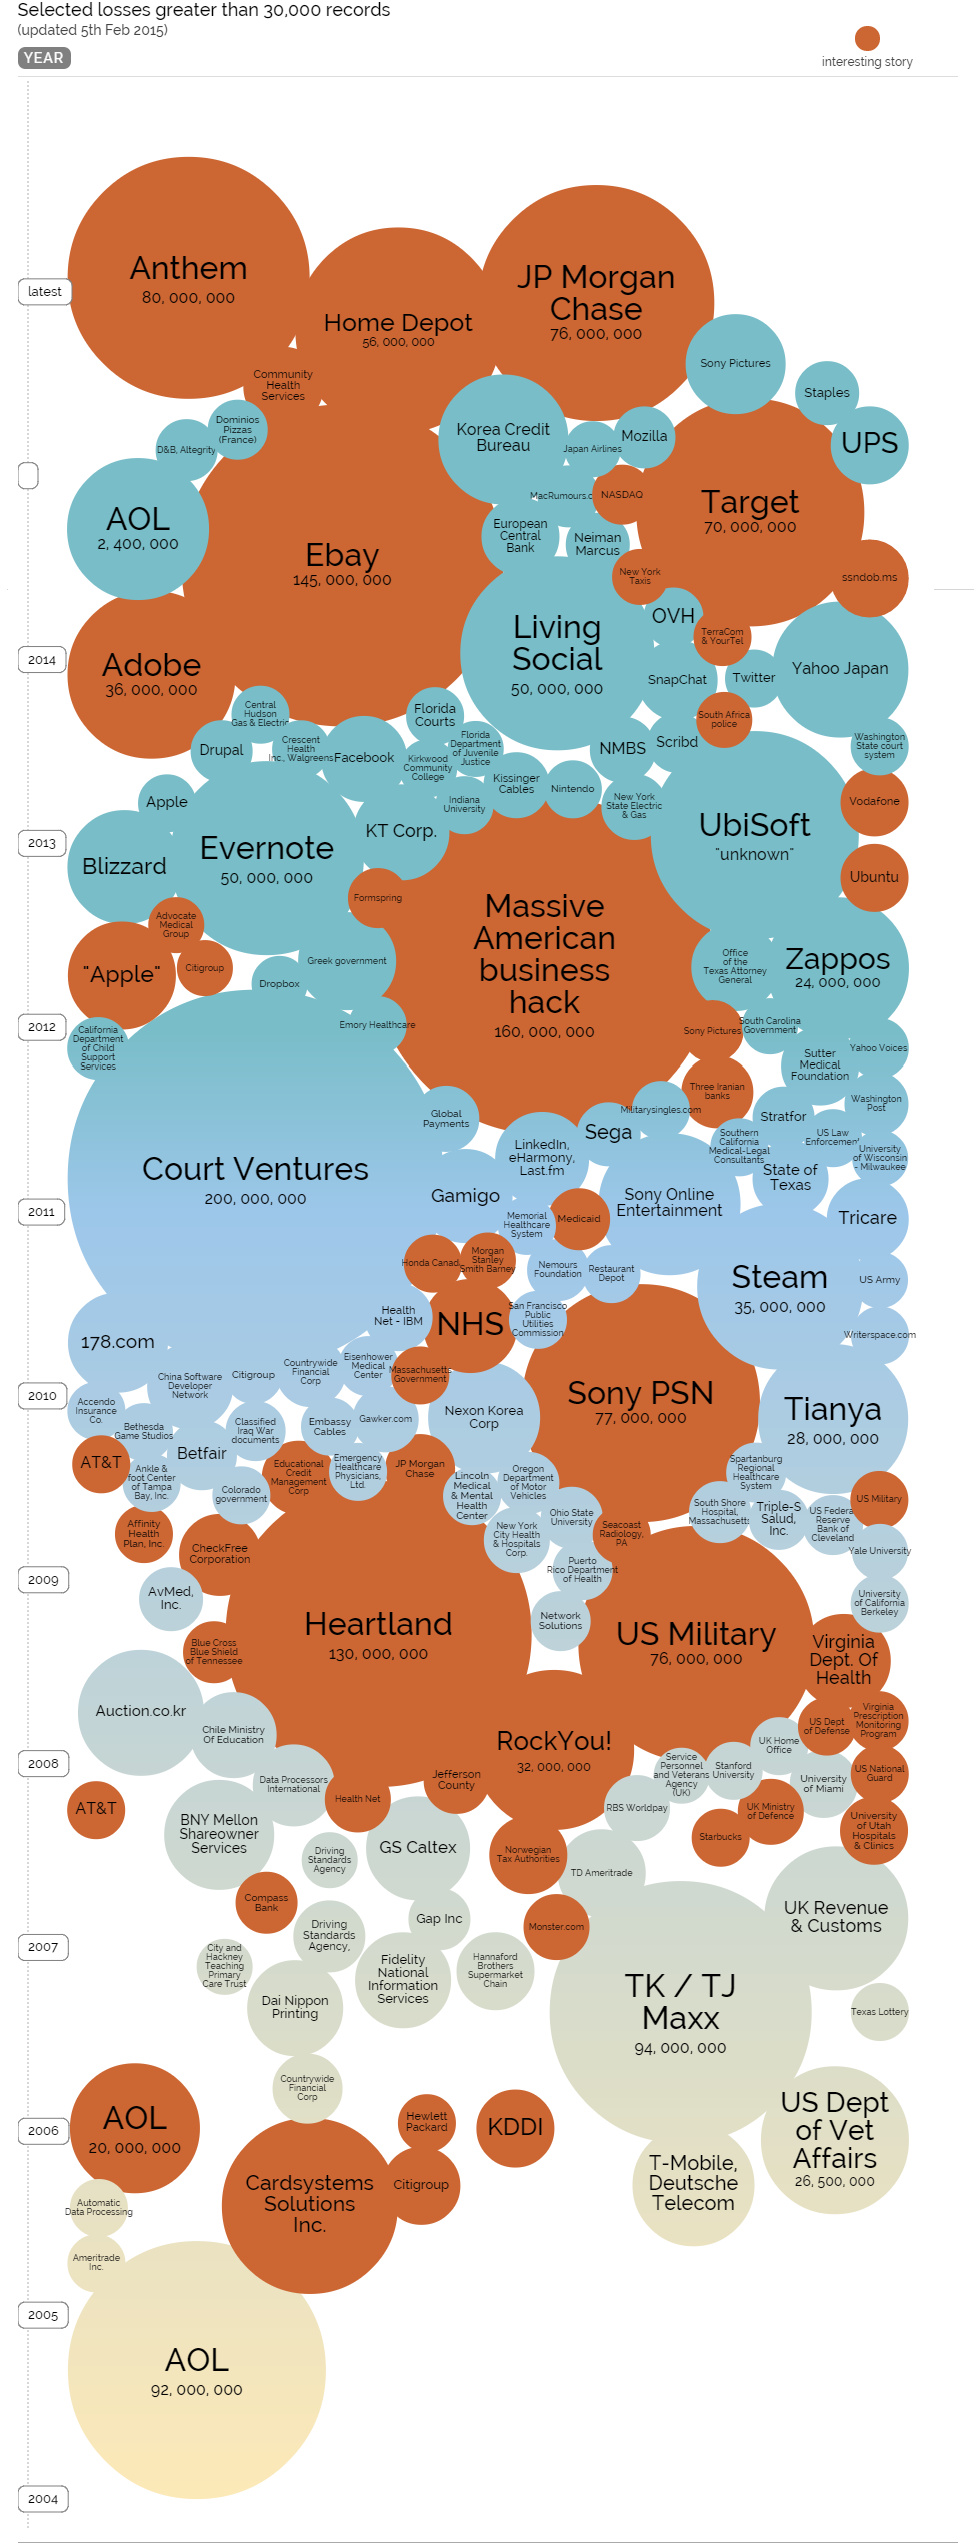 The Largest Hacks and Data Breaches in World History